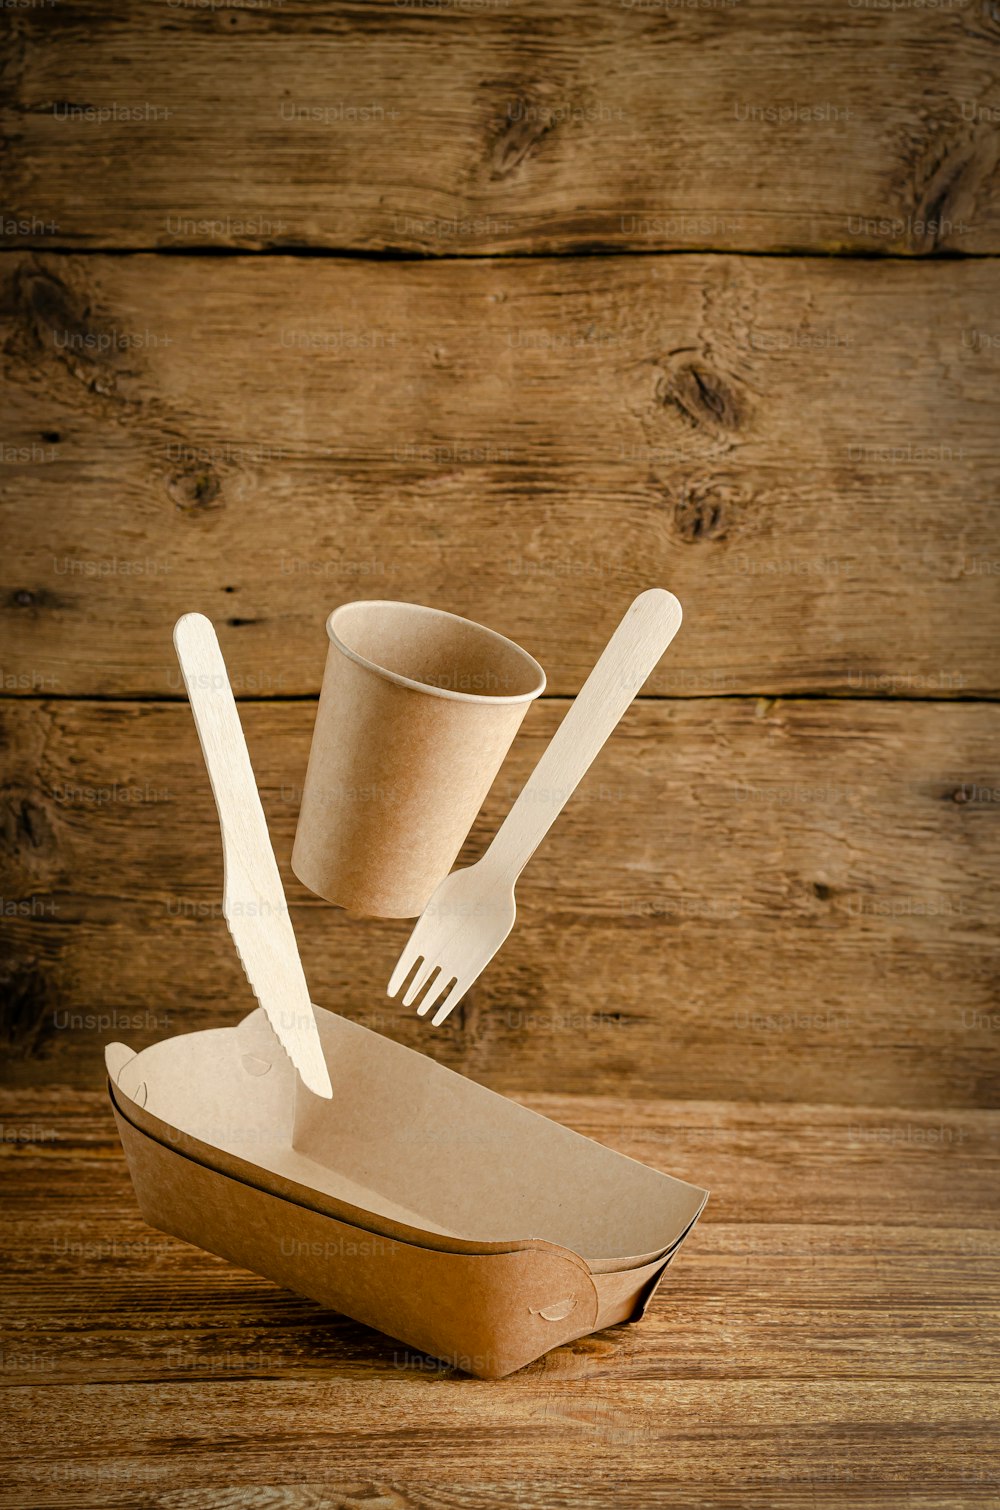 Flying disposable paper tableware on wooden background. Environmental care concept. Copy space.